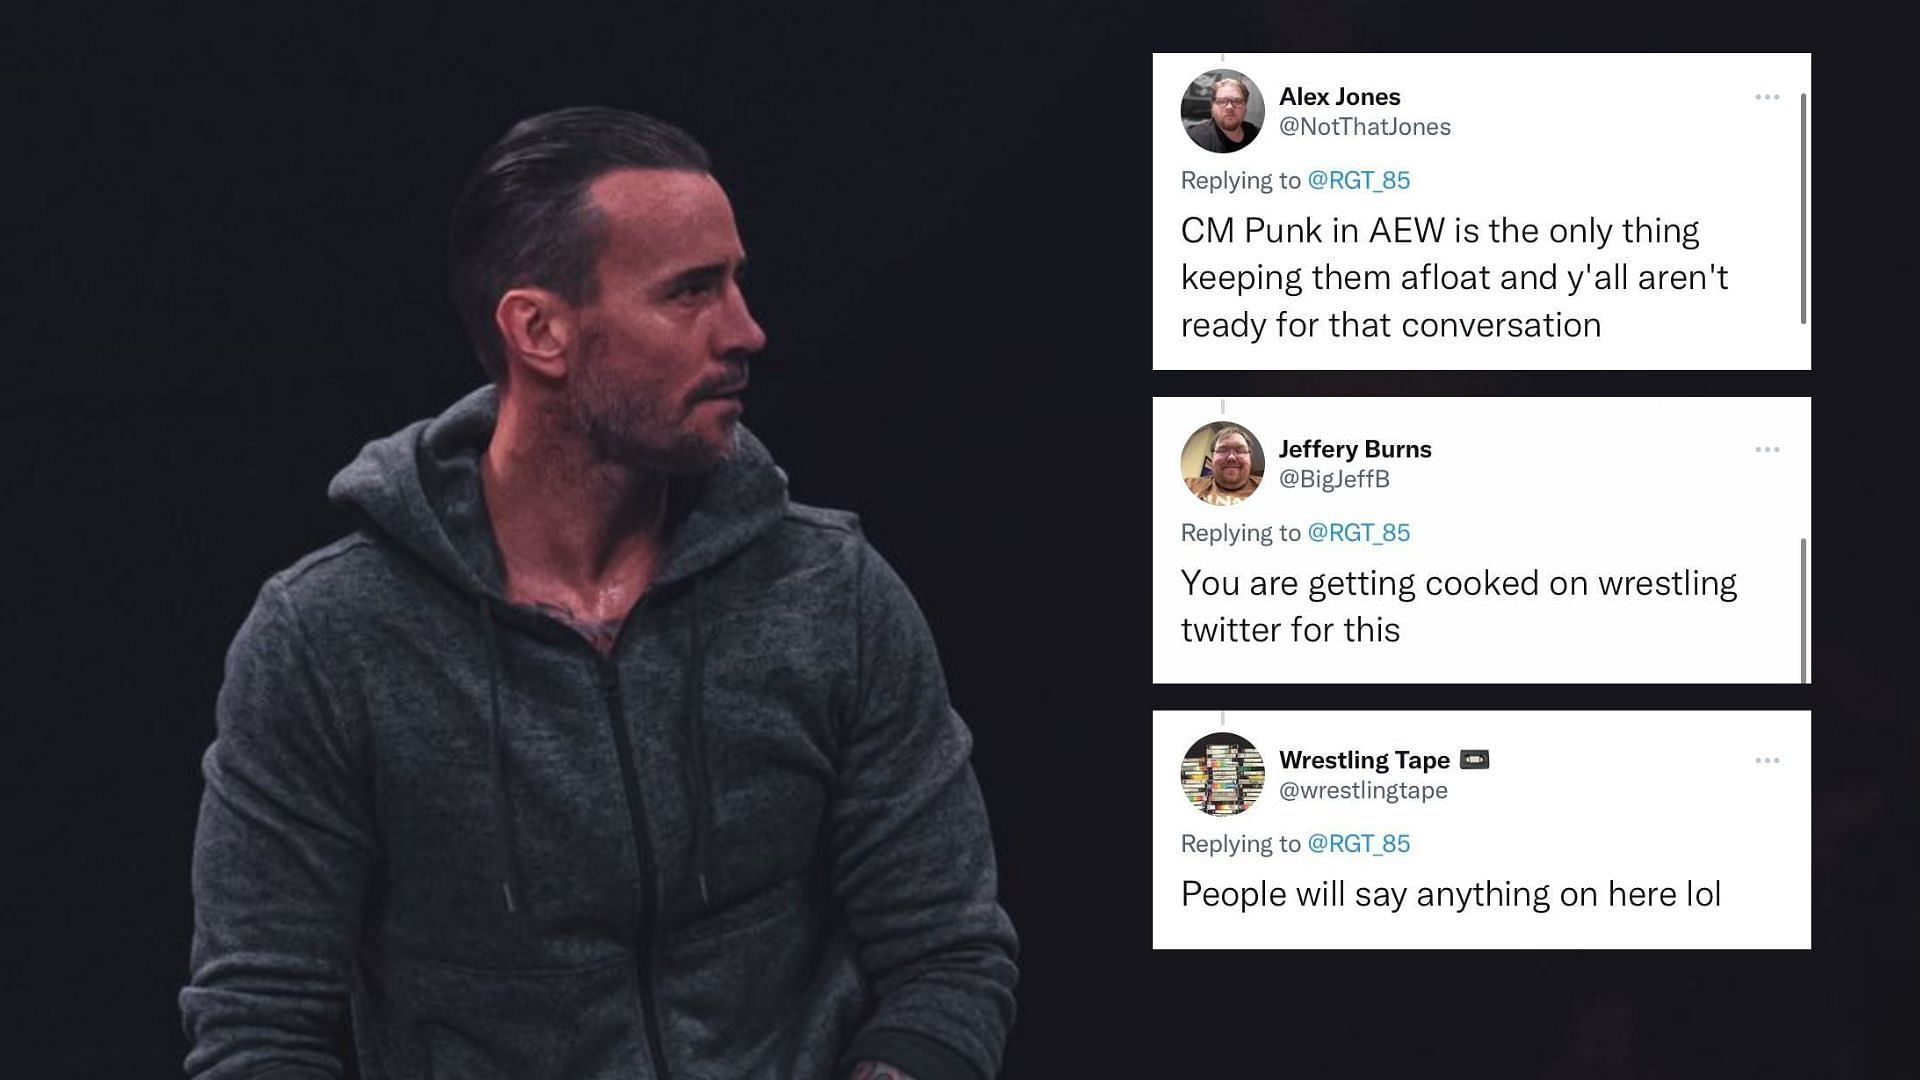 Twitter has had their say on another comparison to do with CM Punk